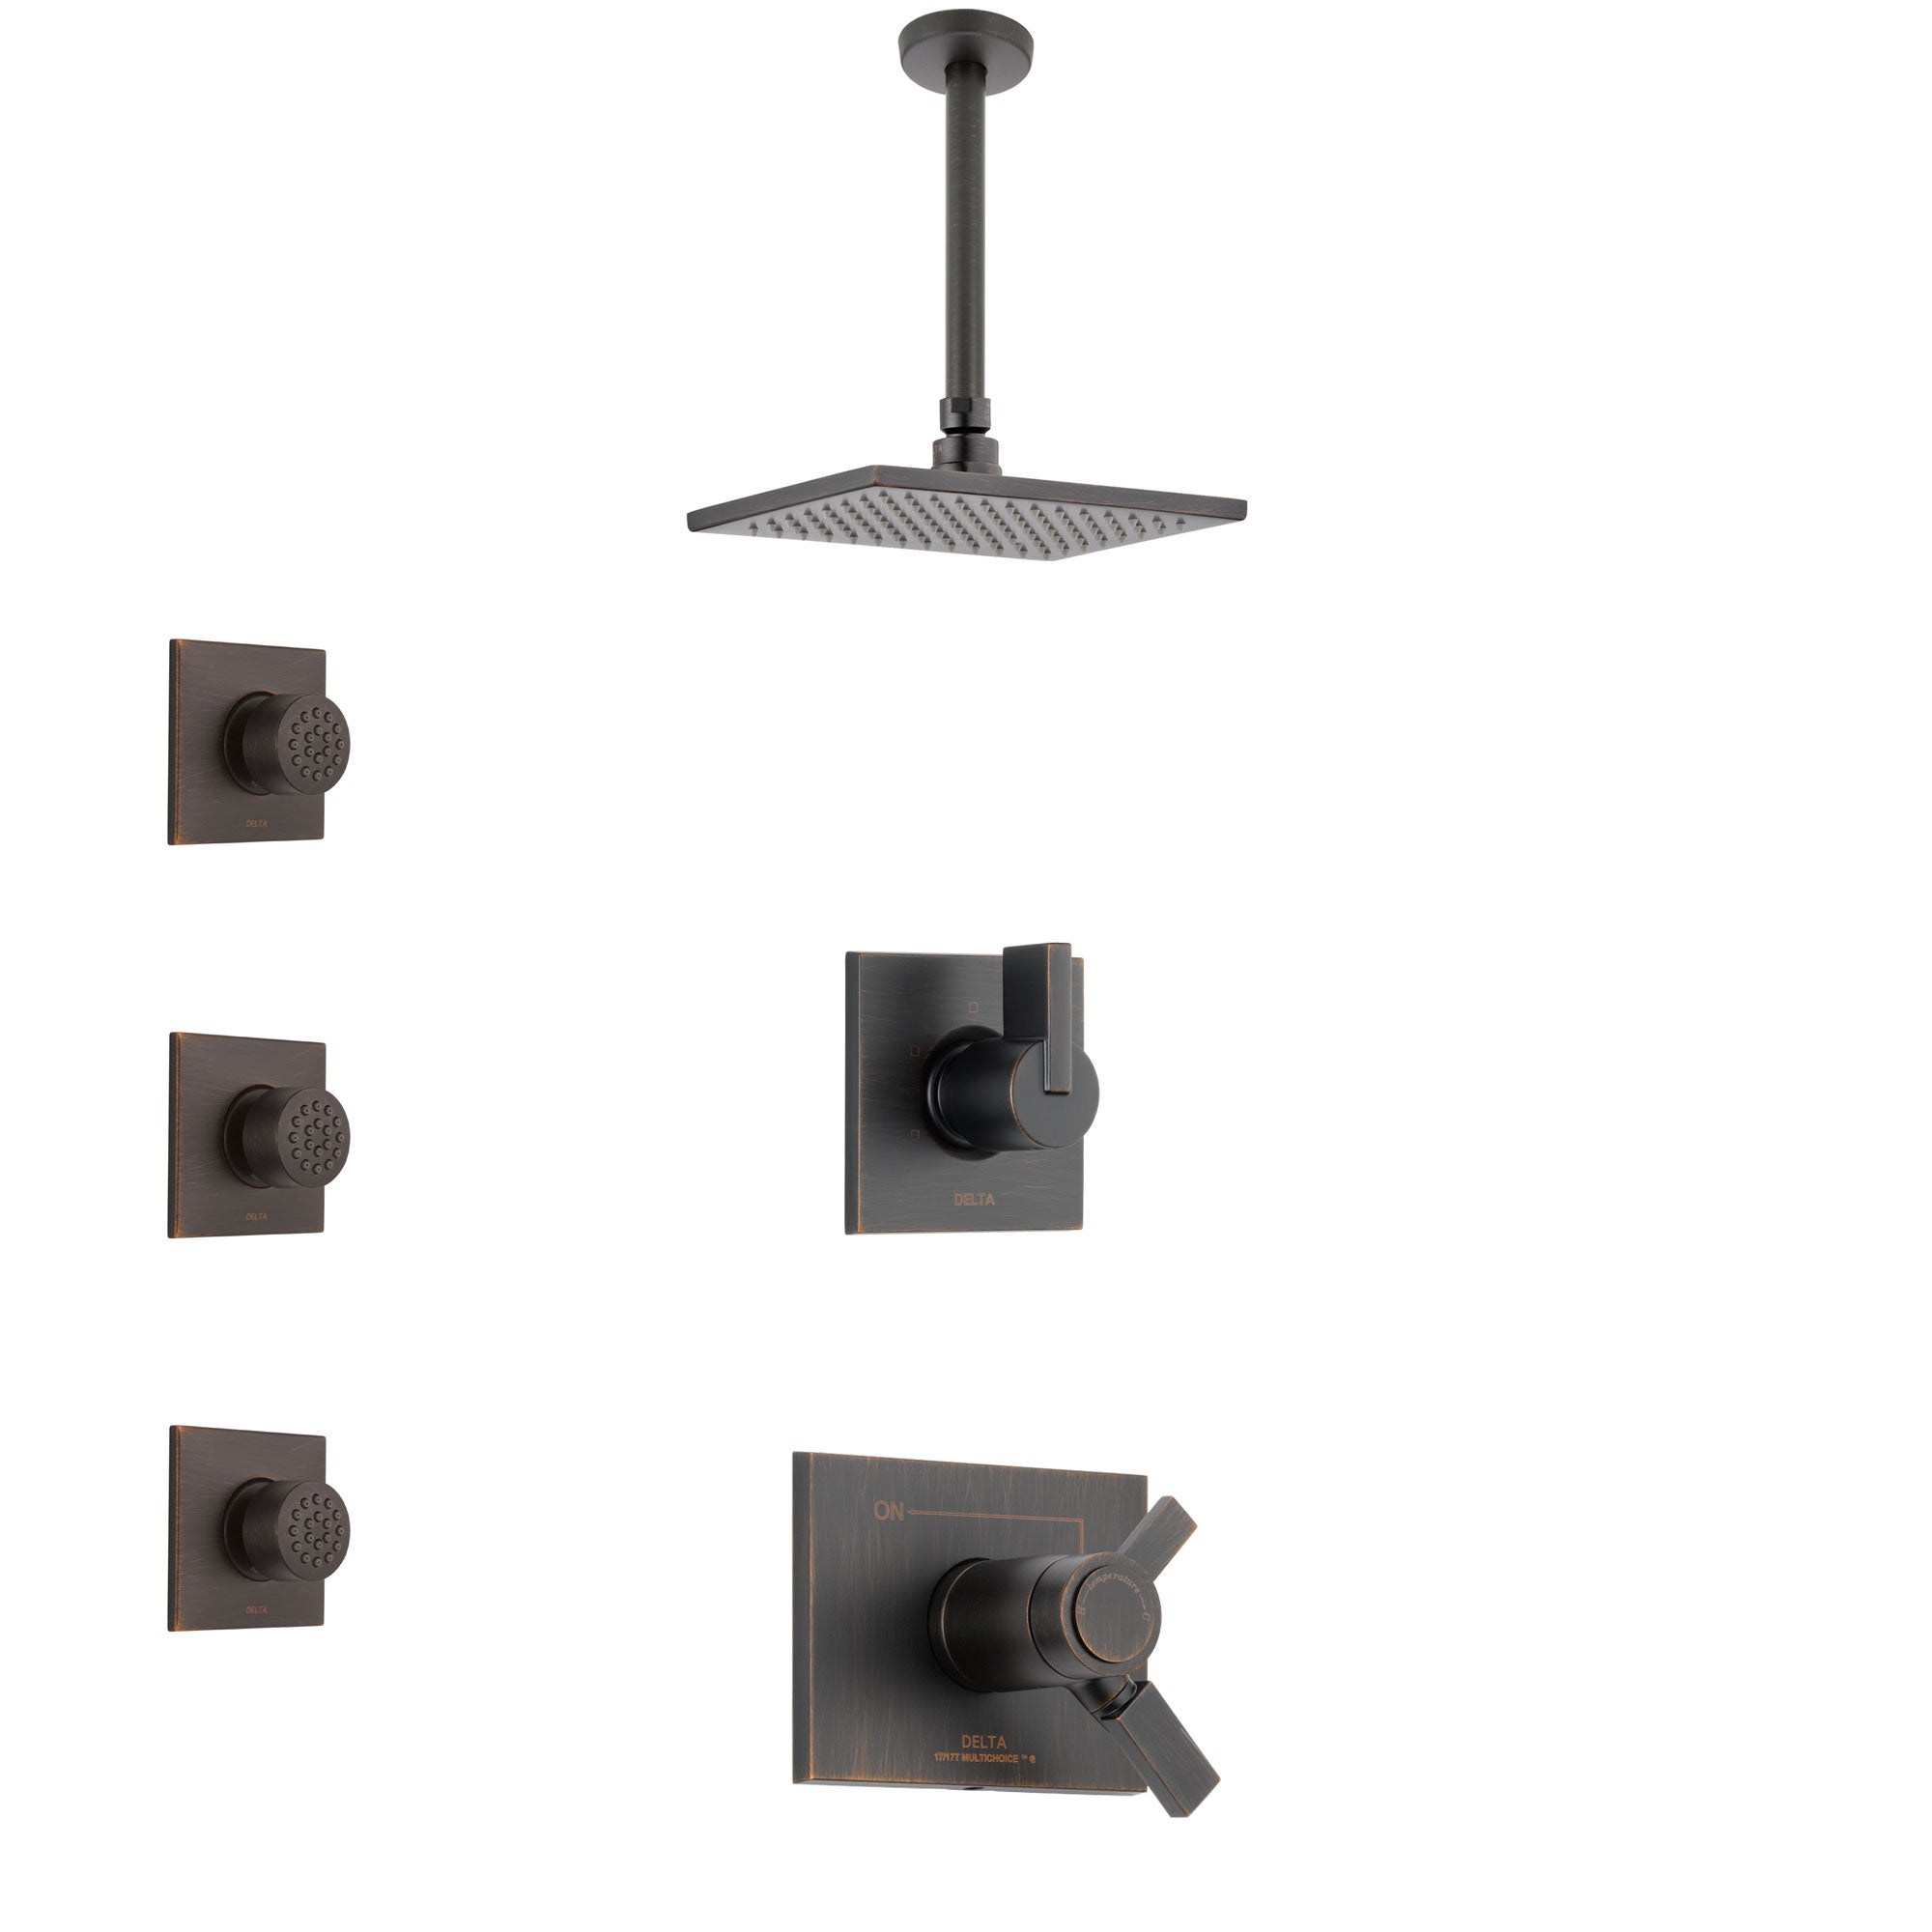 Delta Vero Venetian Bronze Shower System with Dual Thermostatic Control Handle, Diverter, Ceiling Mount Showerhead, and 3 Body Sprays SS17T531RB4